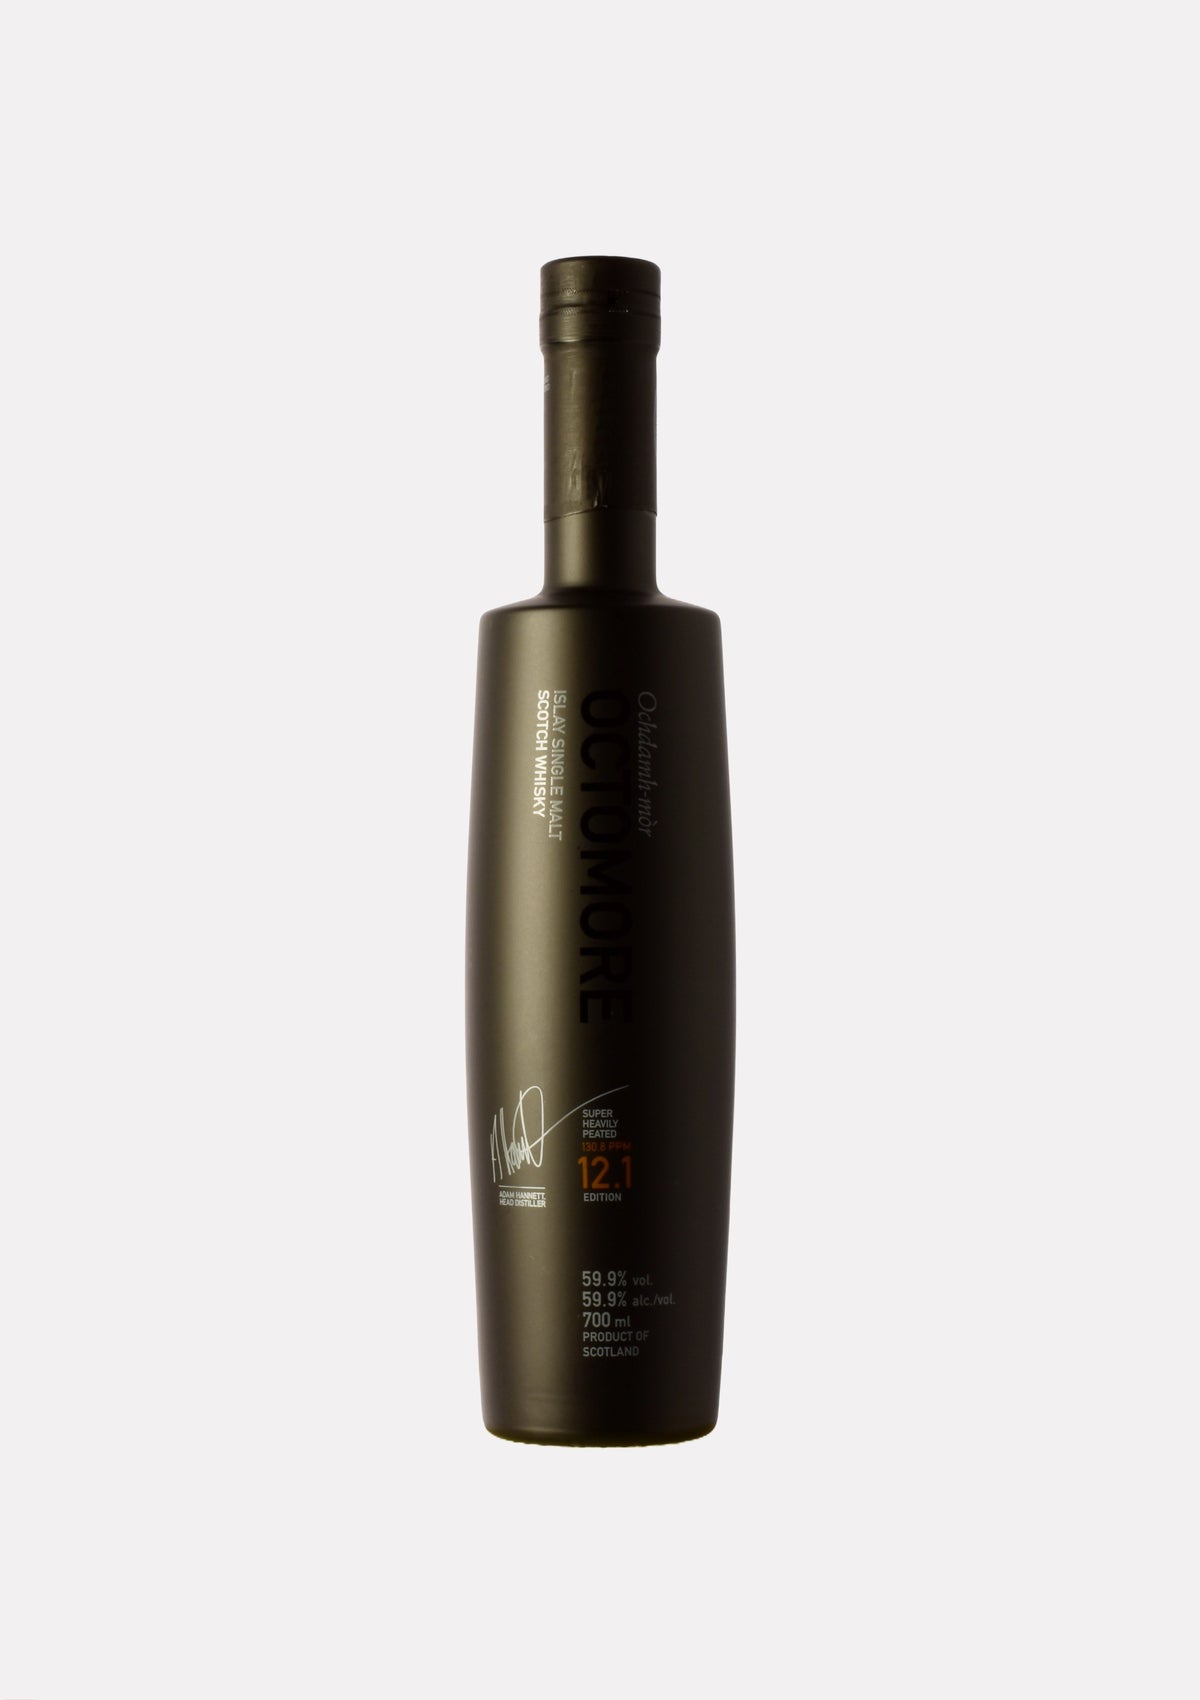 Octomore 12.1 130.8 ppm